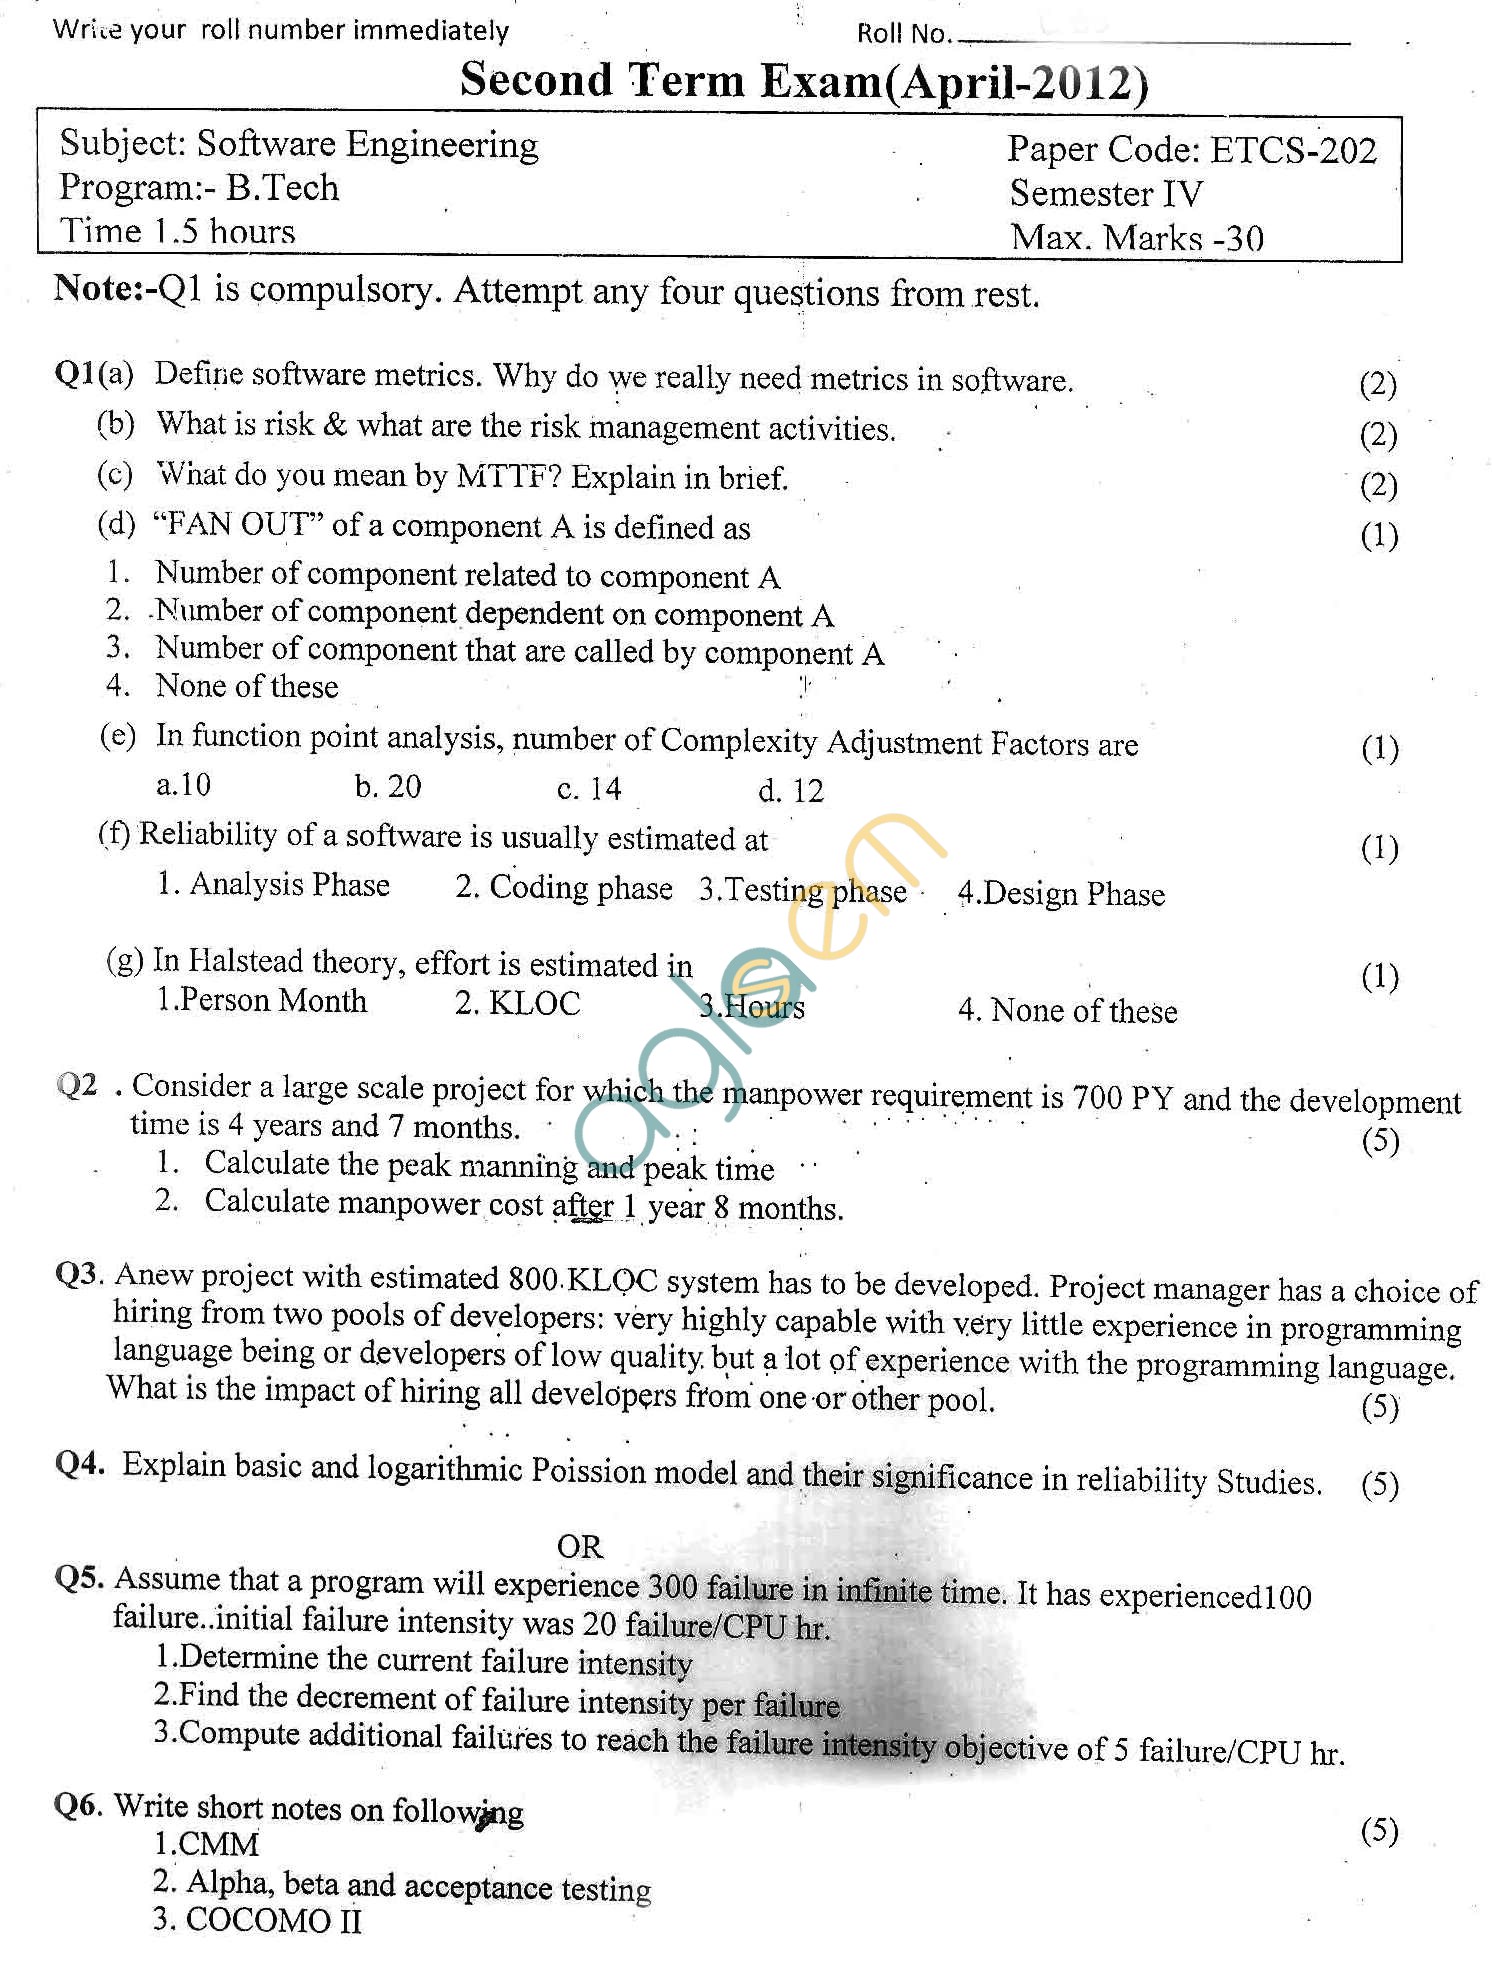 GGSIPU Question Papers Fourth Semester – Second Term 2012 – ETCS-202